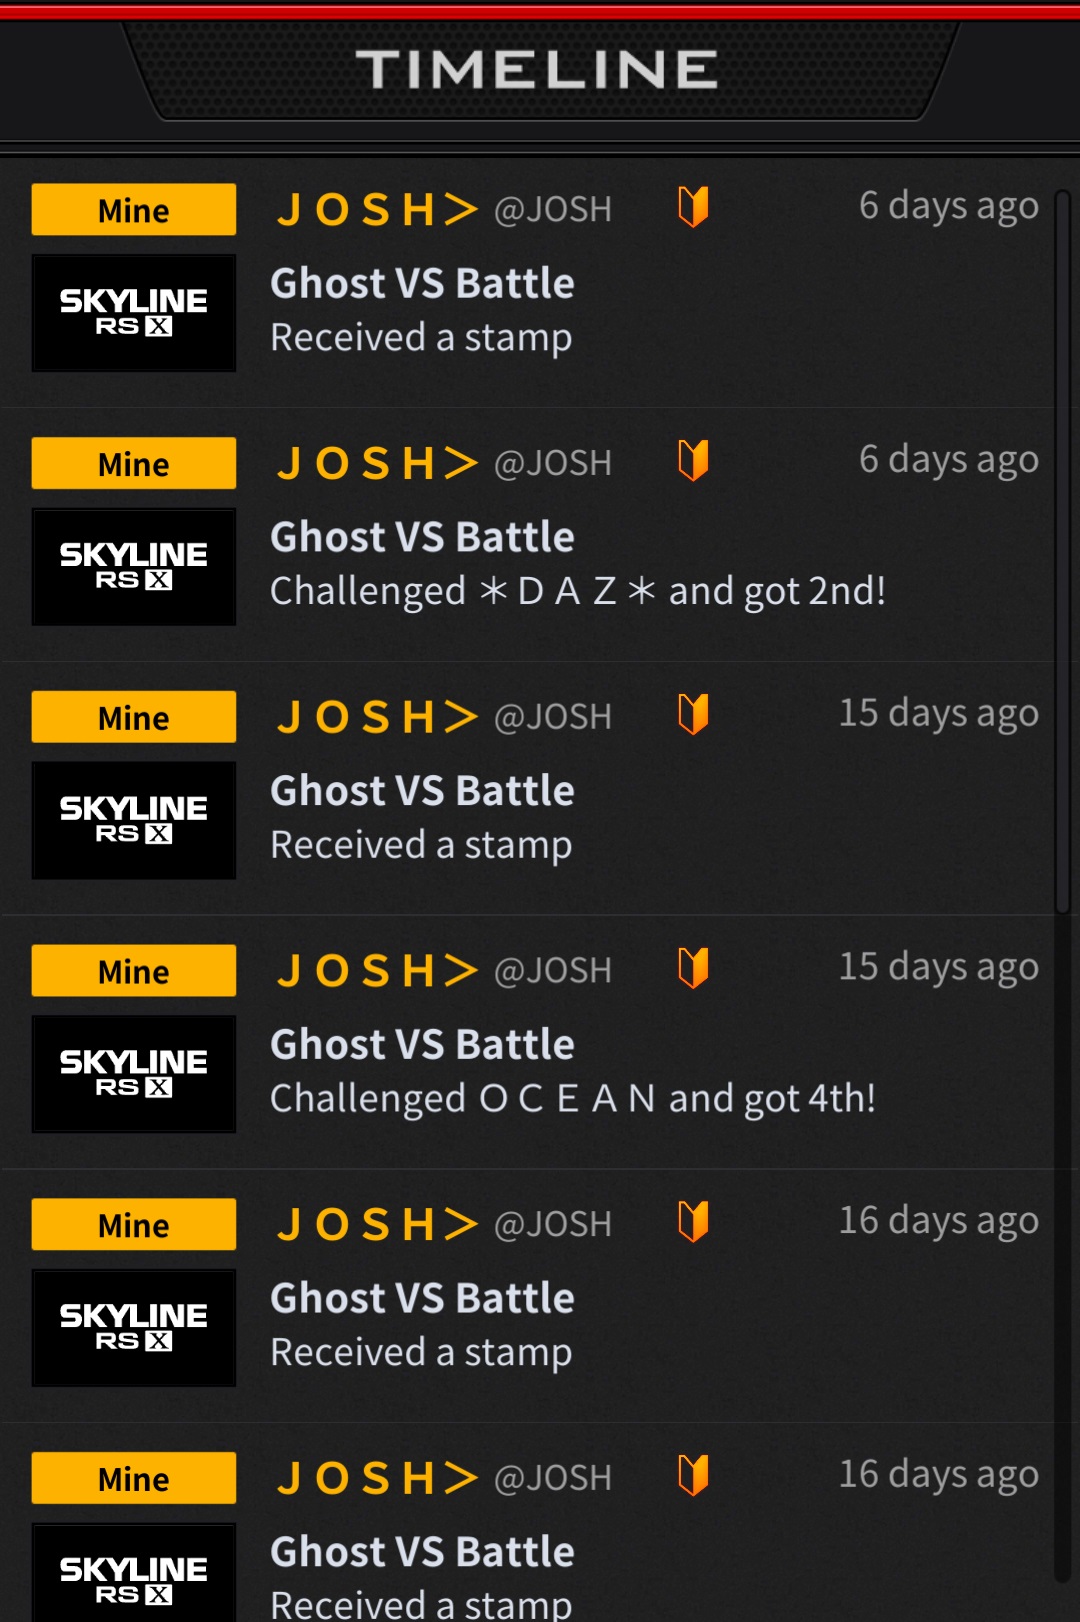 A recent history of my account&rsquo;s Ghost Battles